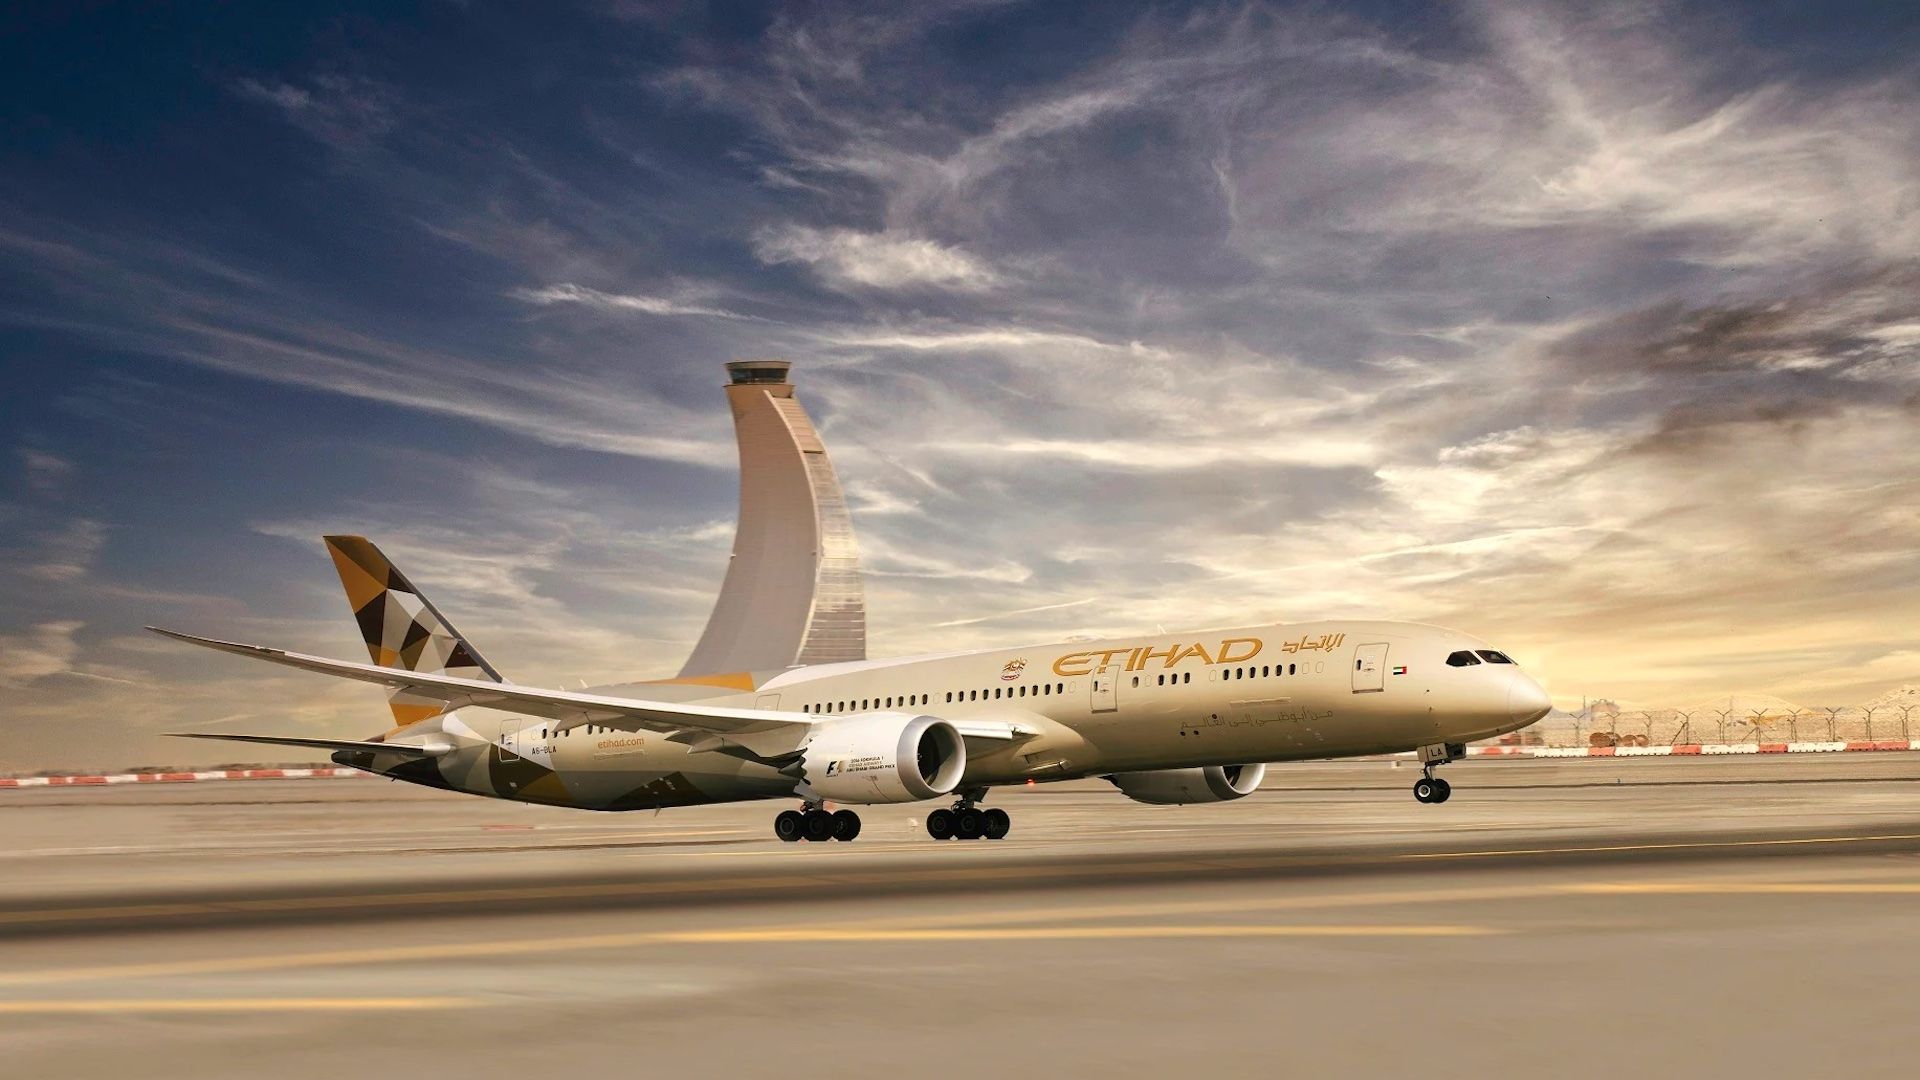 Etihad Airways was presented with two sustainability awards